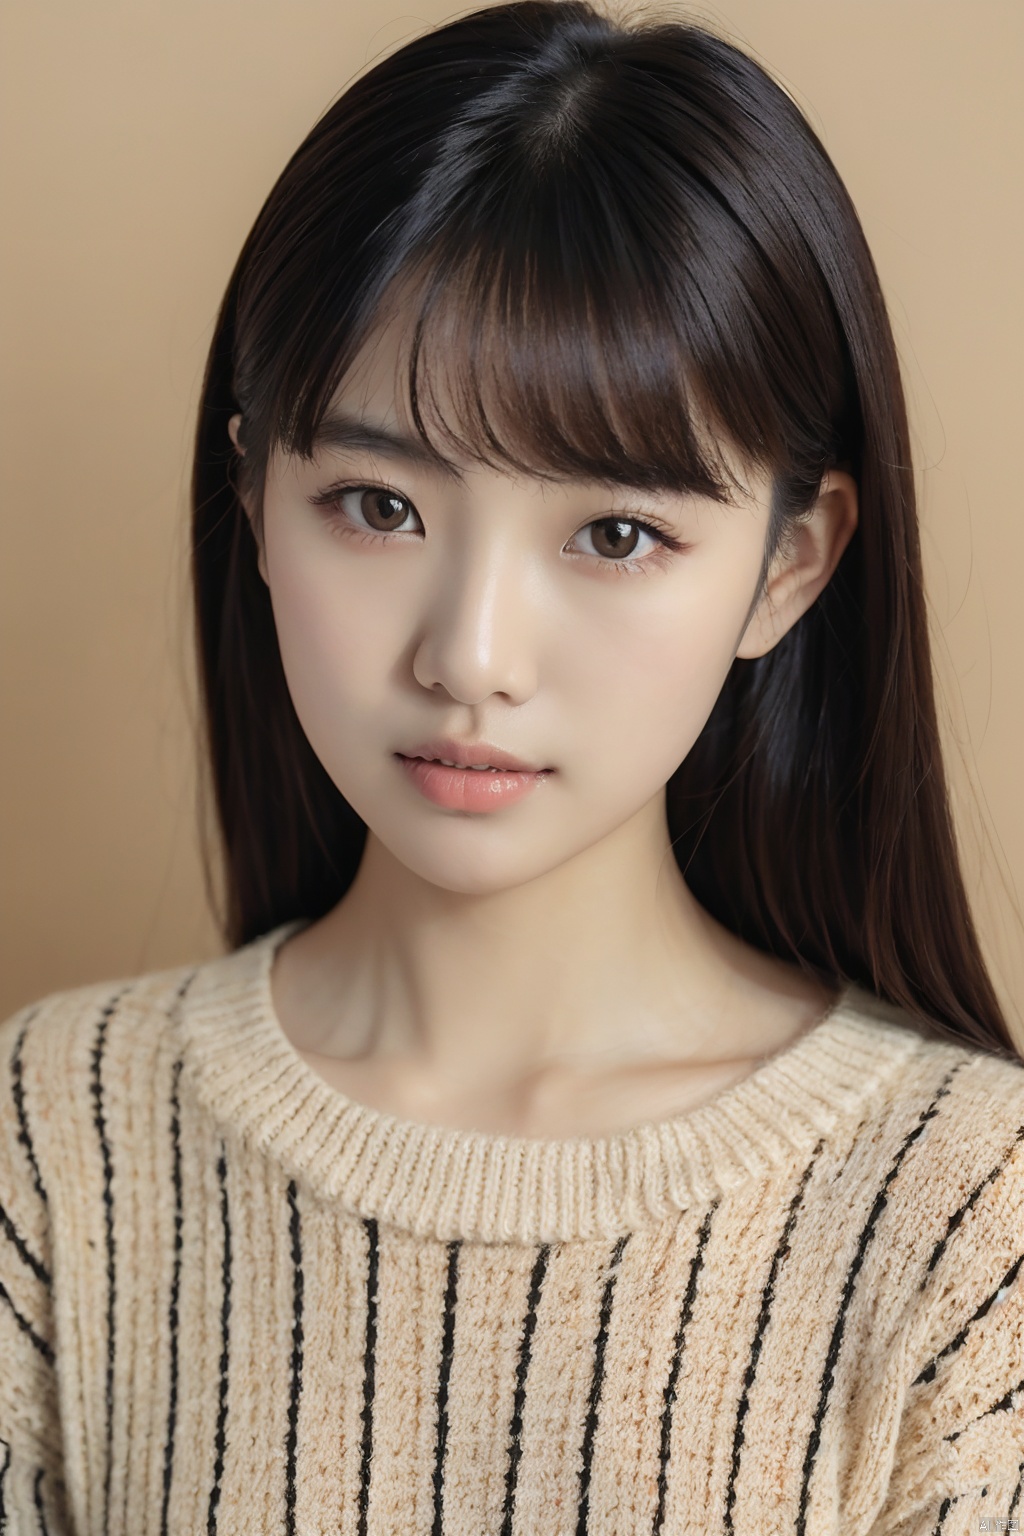 Camera film style,masterpiece, best quality,1girl, asians, a young woman with long, straight dark hair. She has a fair complexion and is gazing directly at the camera. She is wearing a knitted sweater with a patterned design, predominantly in beige and black tones. The background is plain, ensuring the viewer's focus remains on the subject